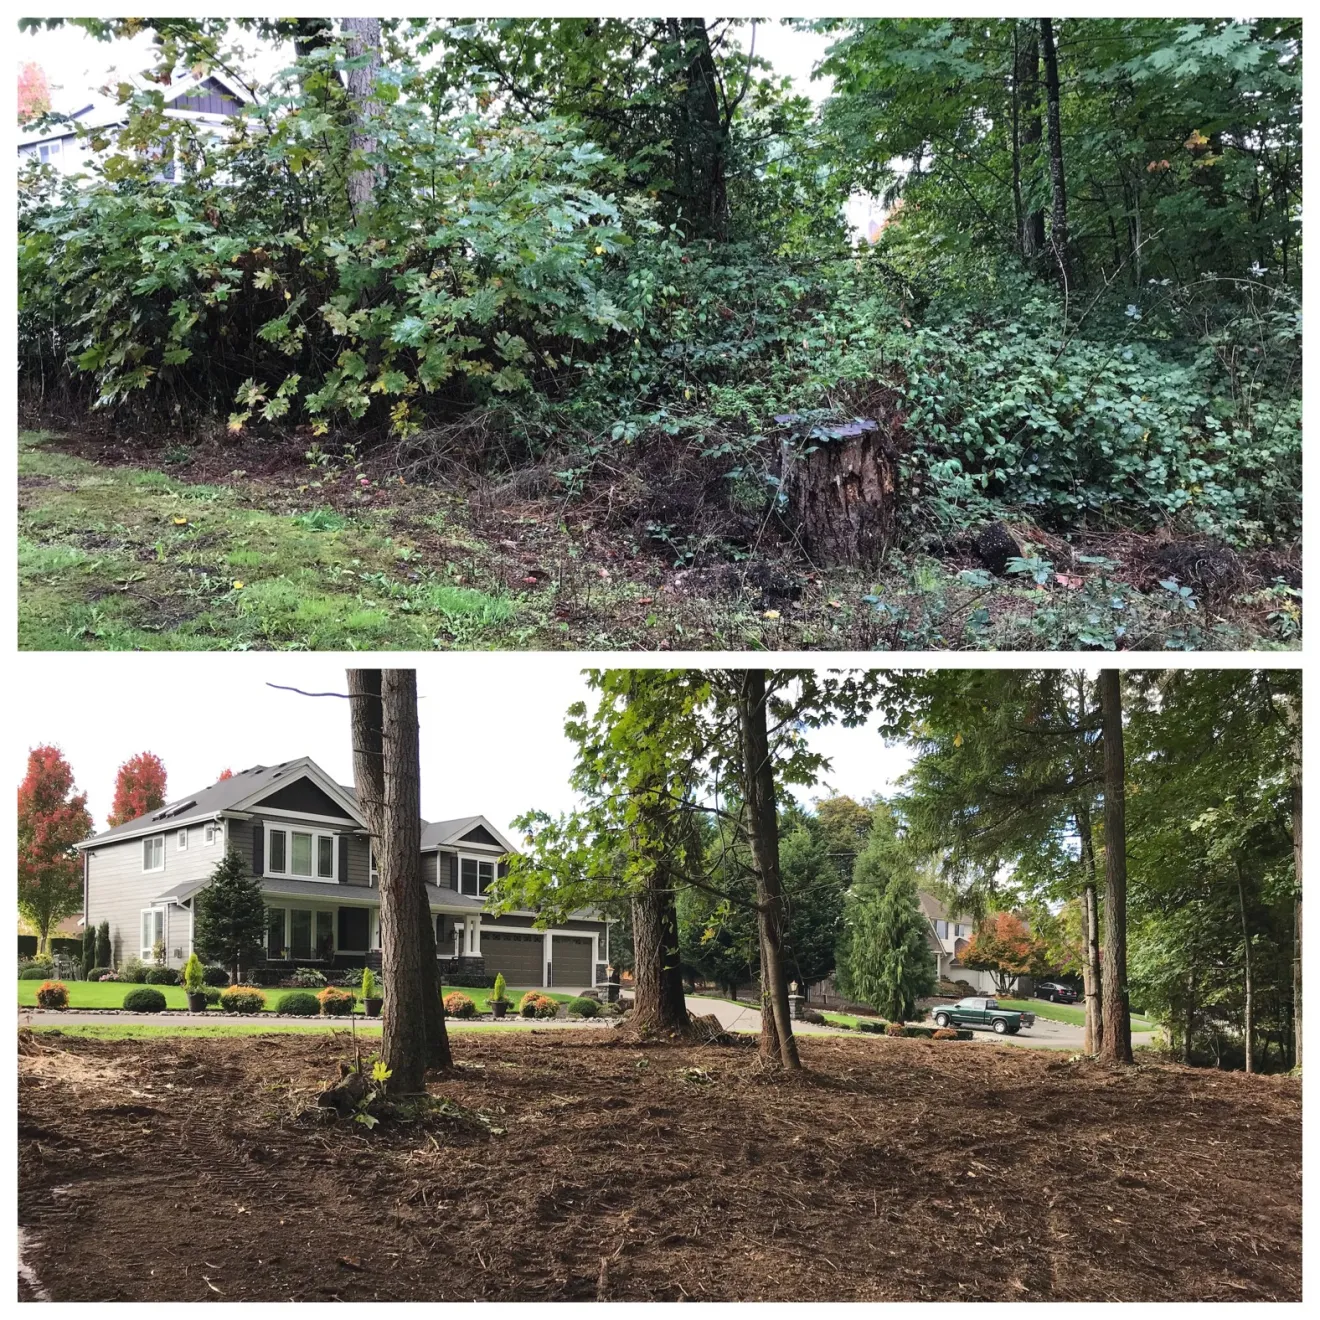 5-star land clearing services in Indianapolis by Indy Trash Guy